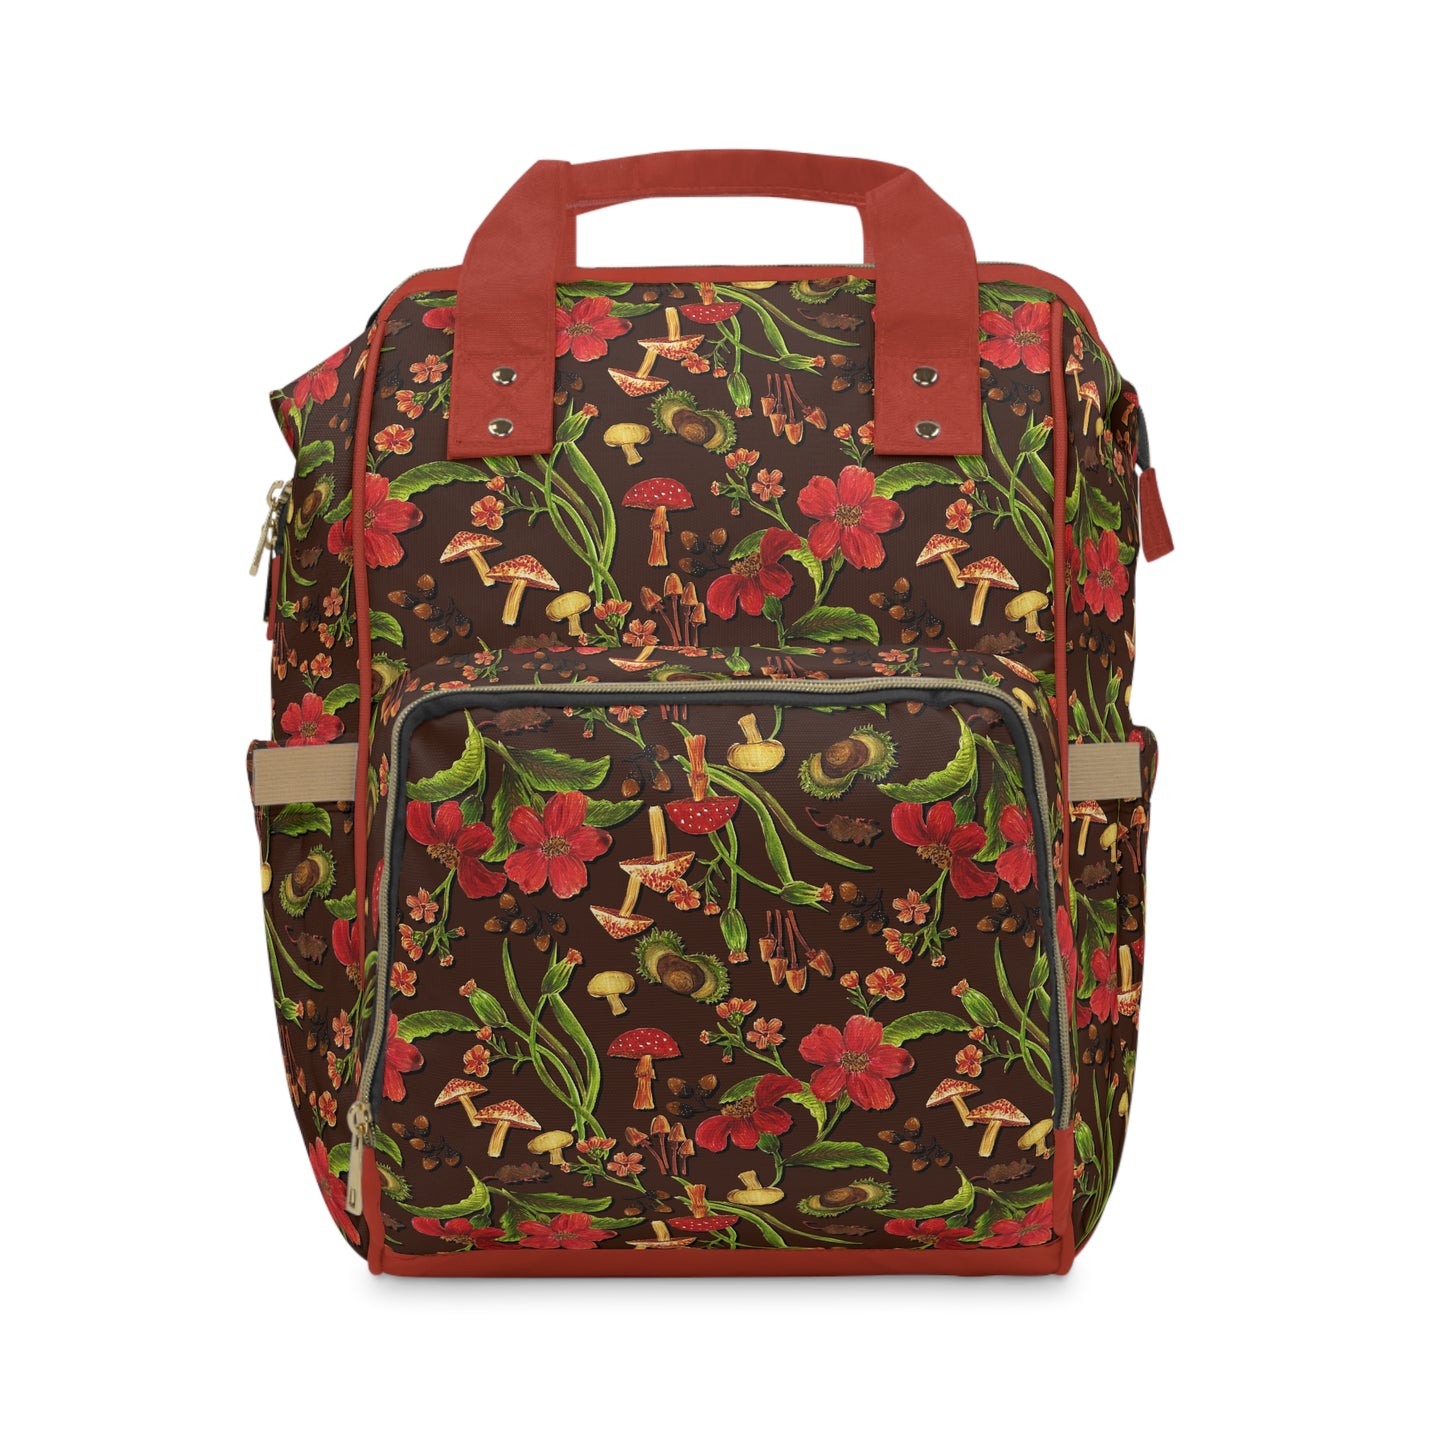 Undergrowth diaper tote with mushrooms and squirrels